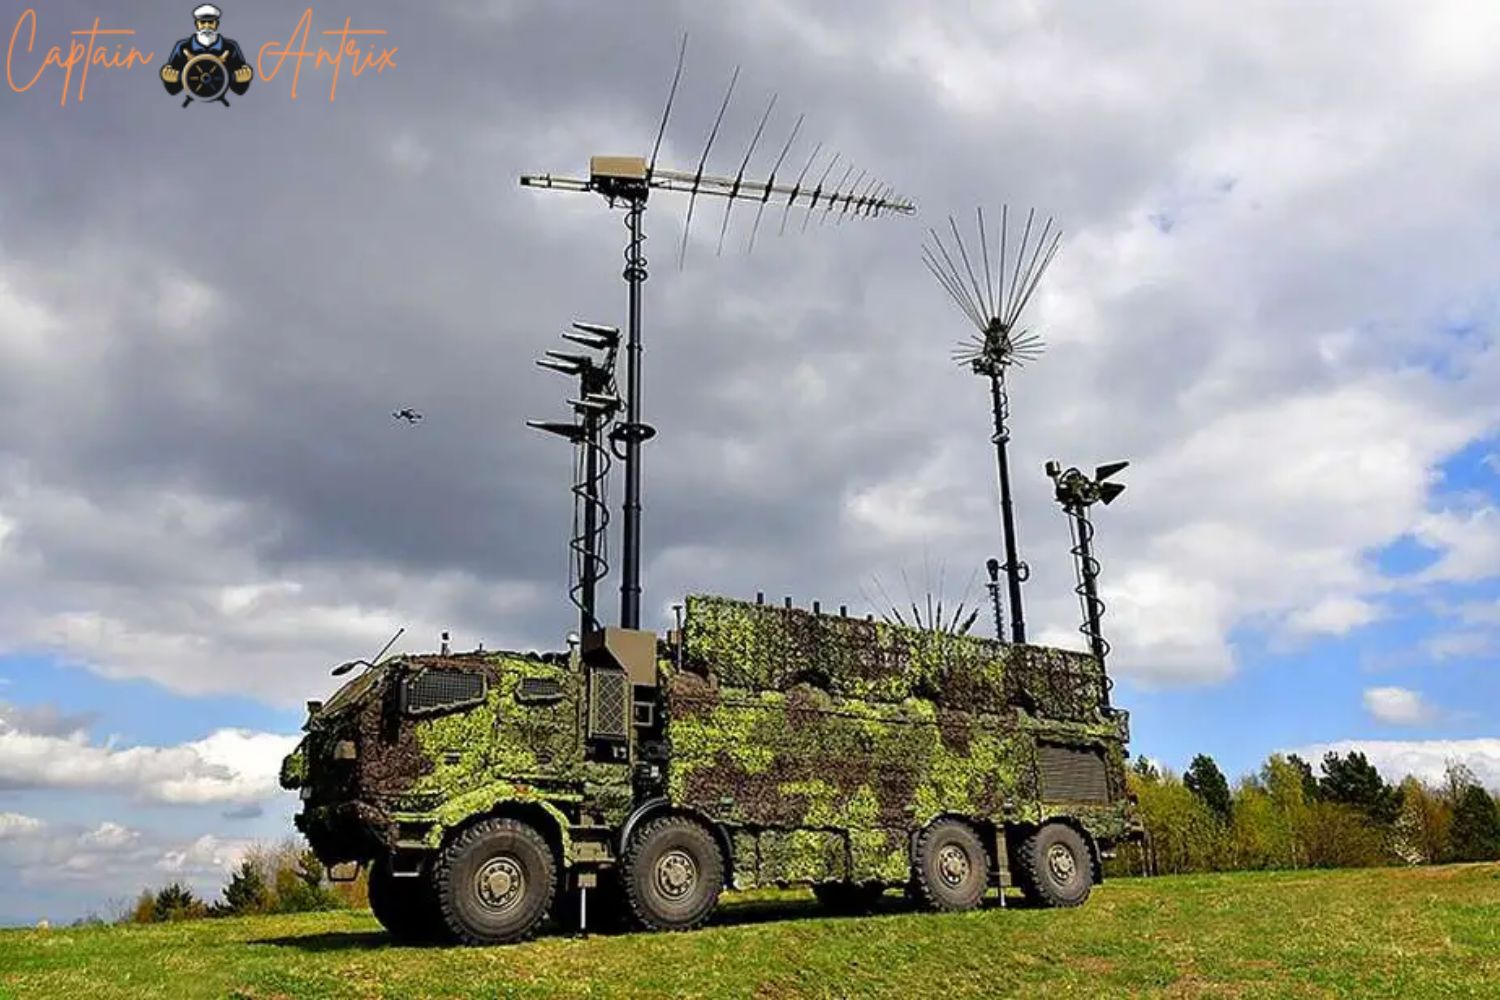 NATO Collaboration in Focus: Deploying Advanced Electronic Warfare Capabilities with the STARKOM System